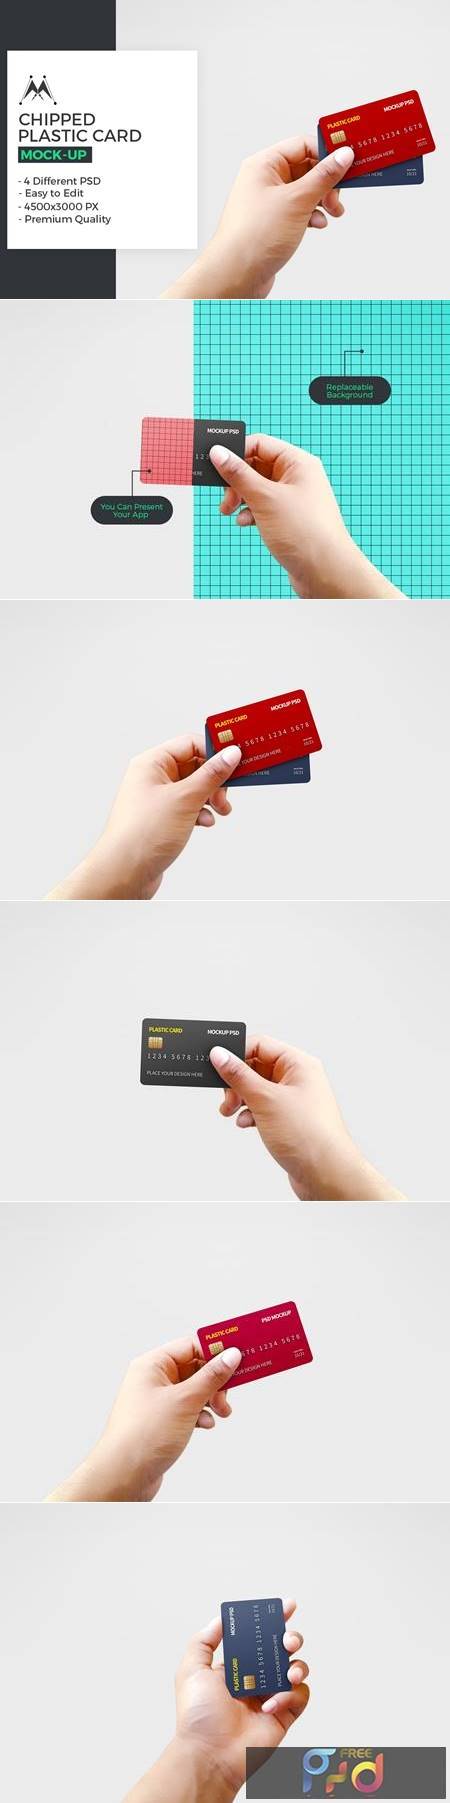 Chipped Plastic Card in Hand Mockup 5946311 1